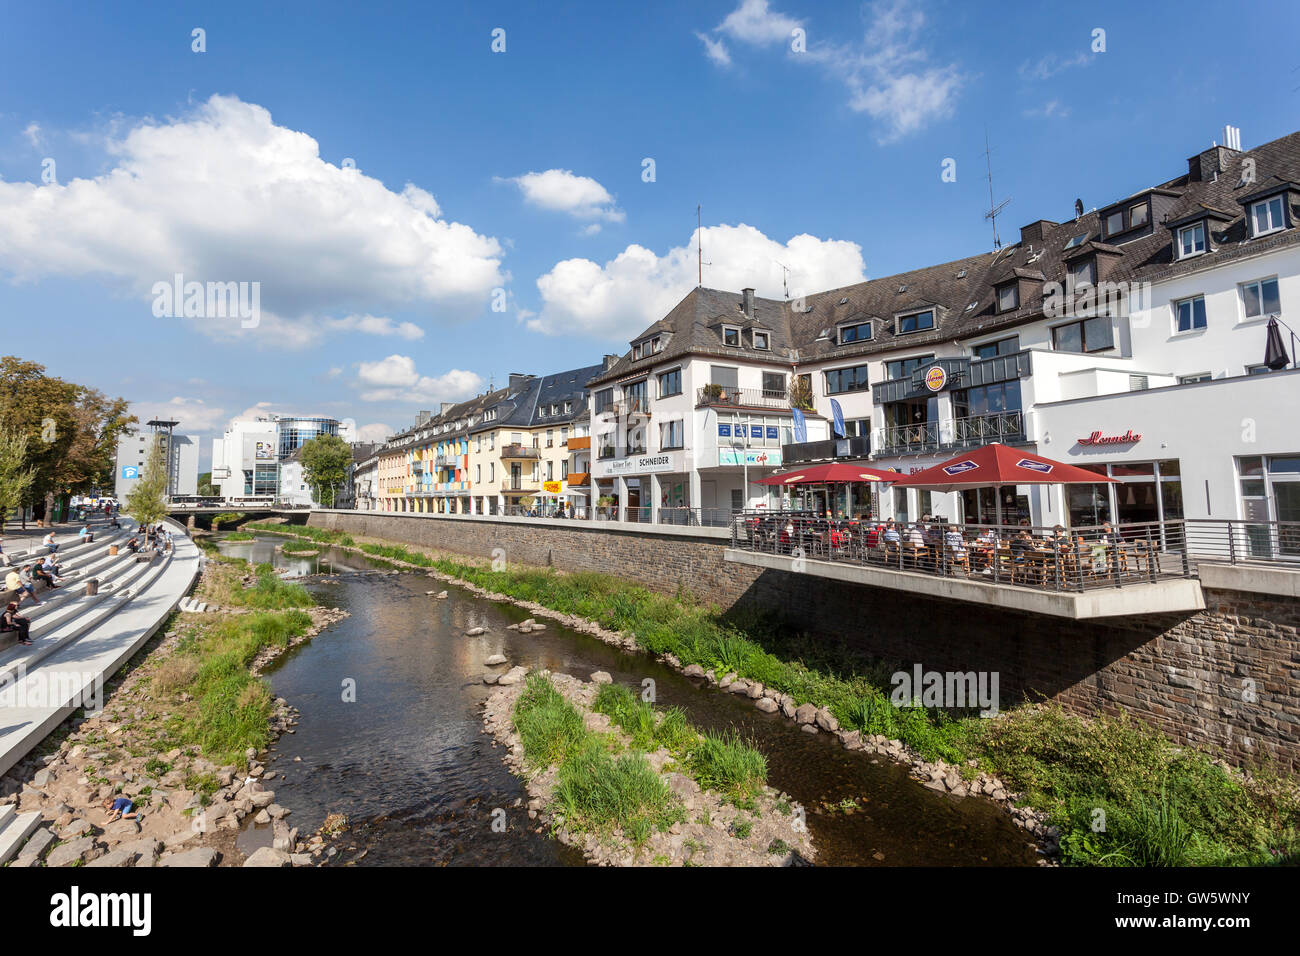 Rriver Sieg in the city of Siegen, Germany Stock Photo